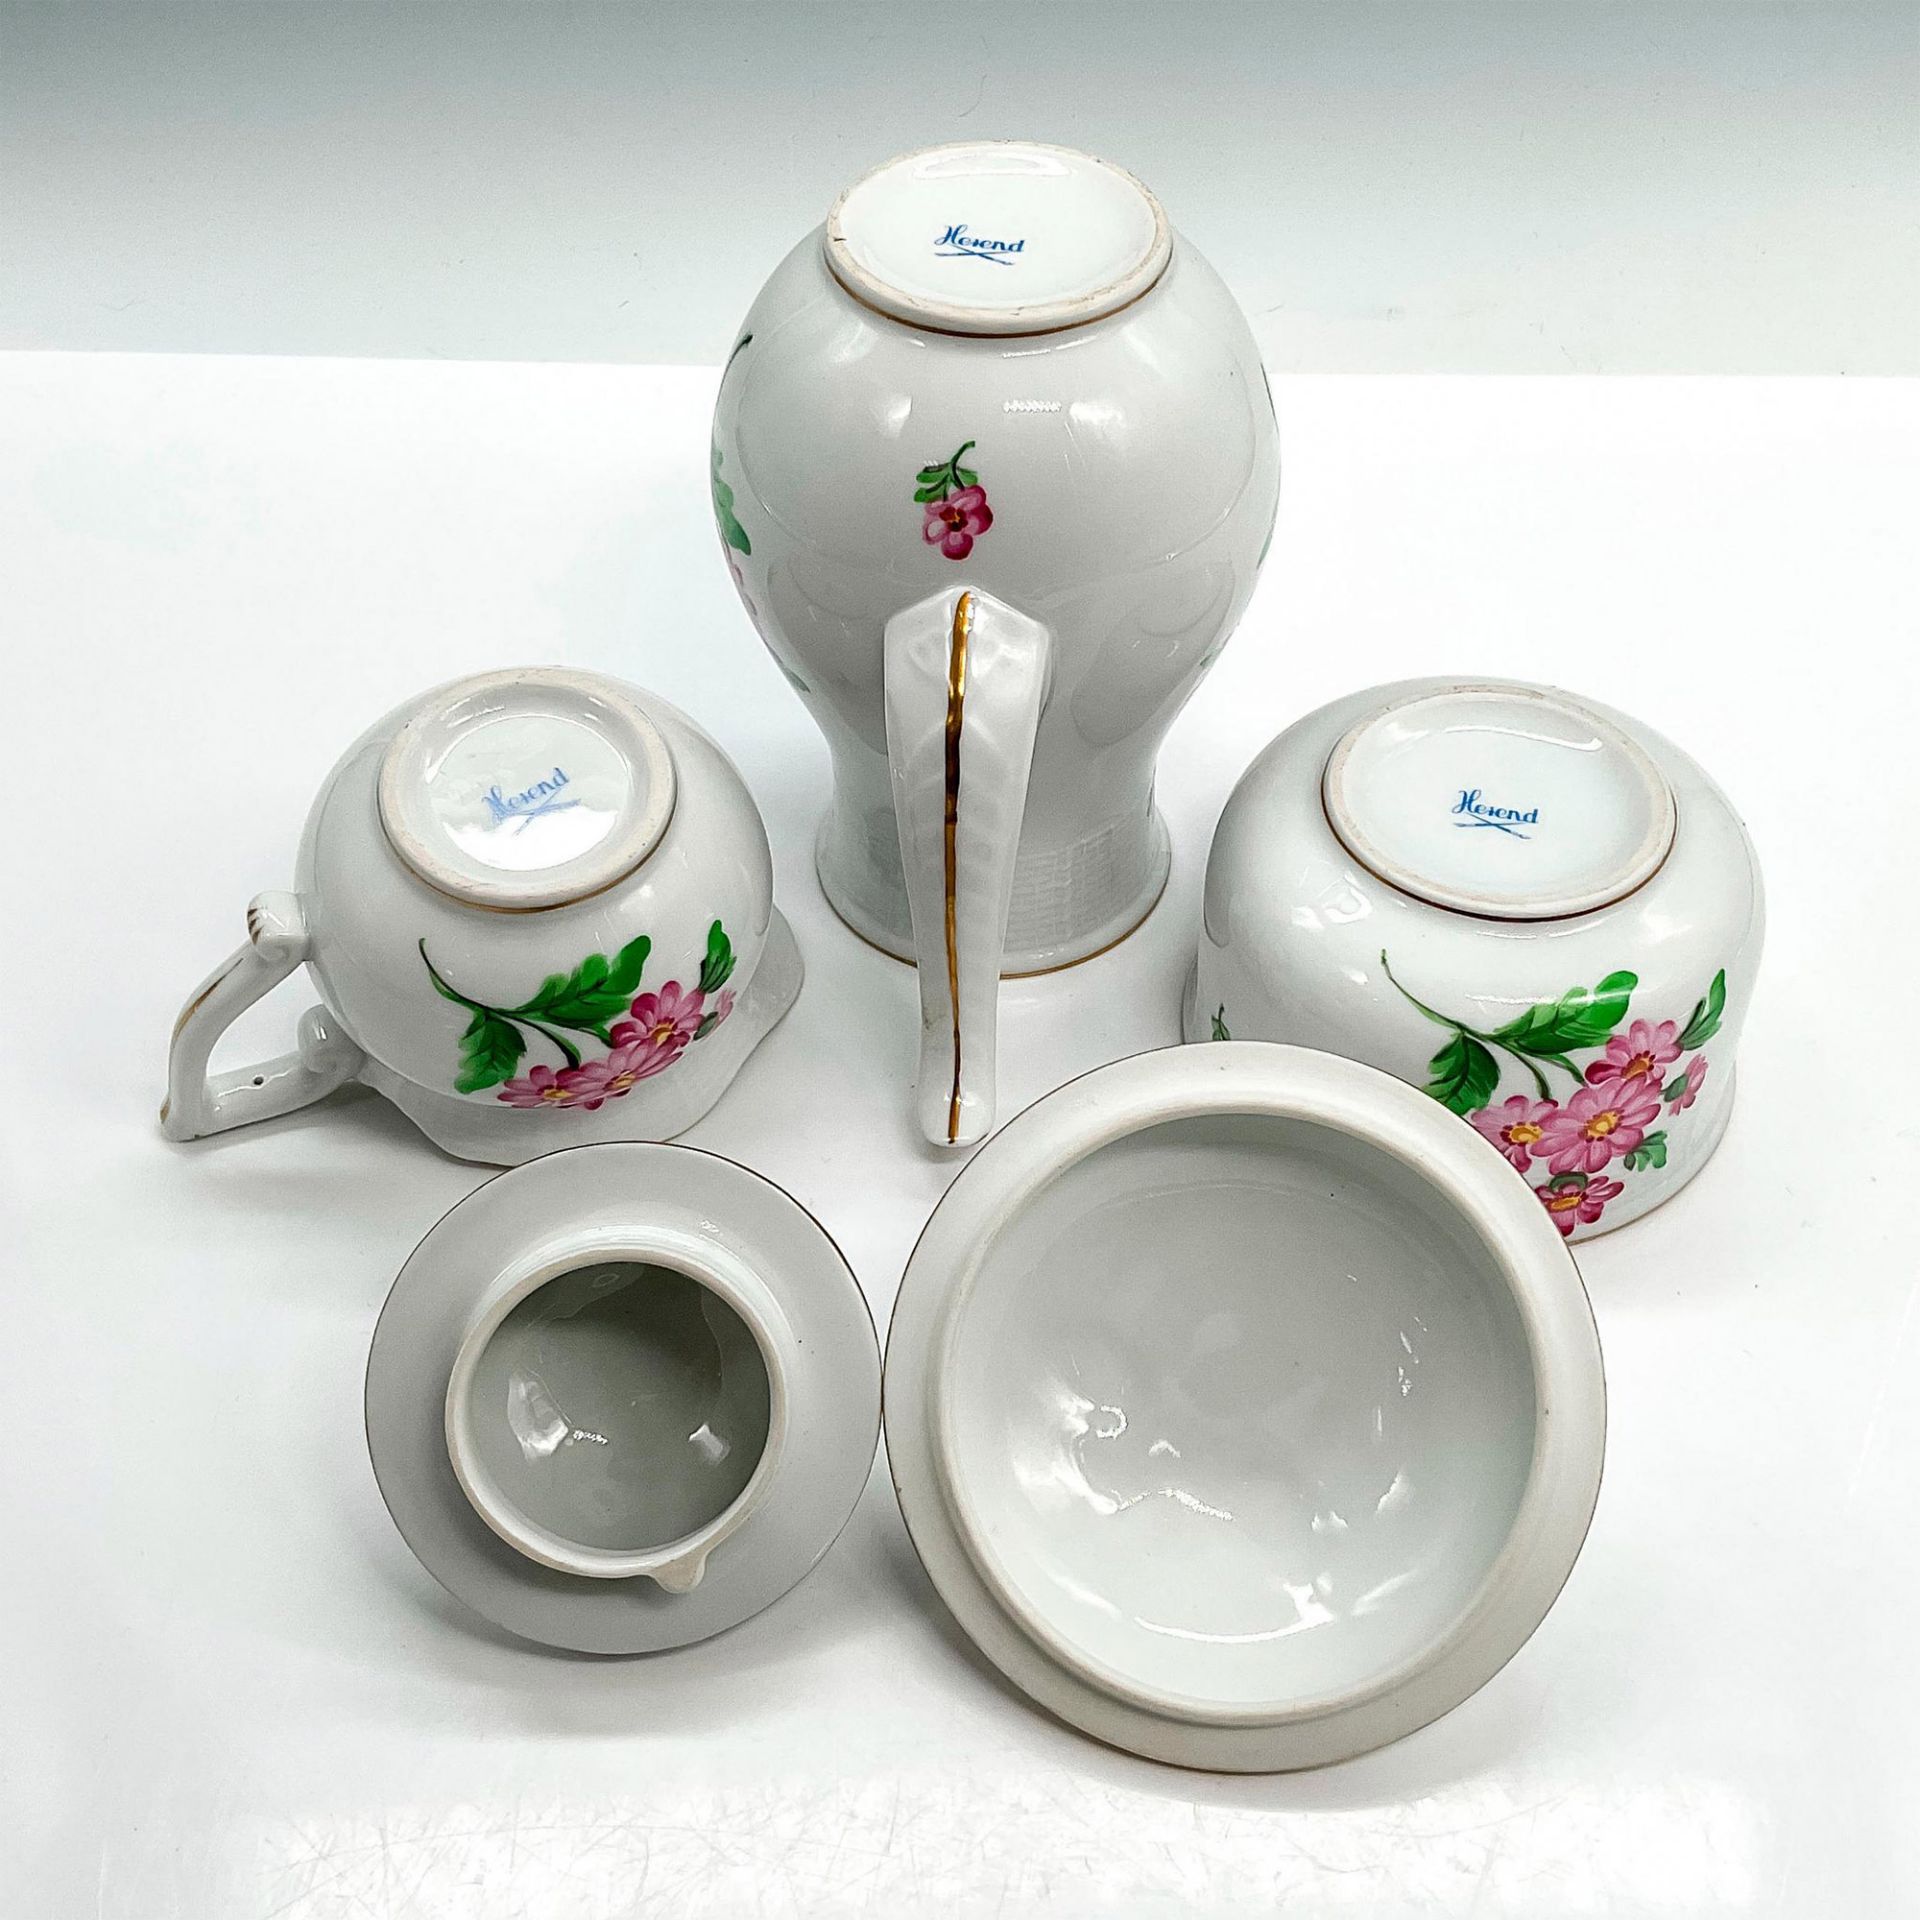 3pc Herend Porcelain Coffee Service Set, Pink Flowers - Image 3 of 3